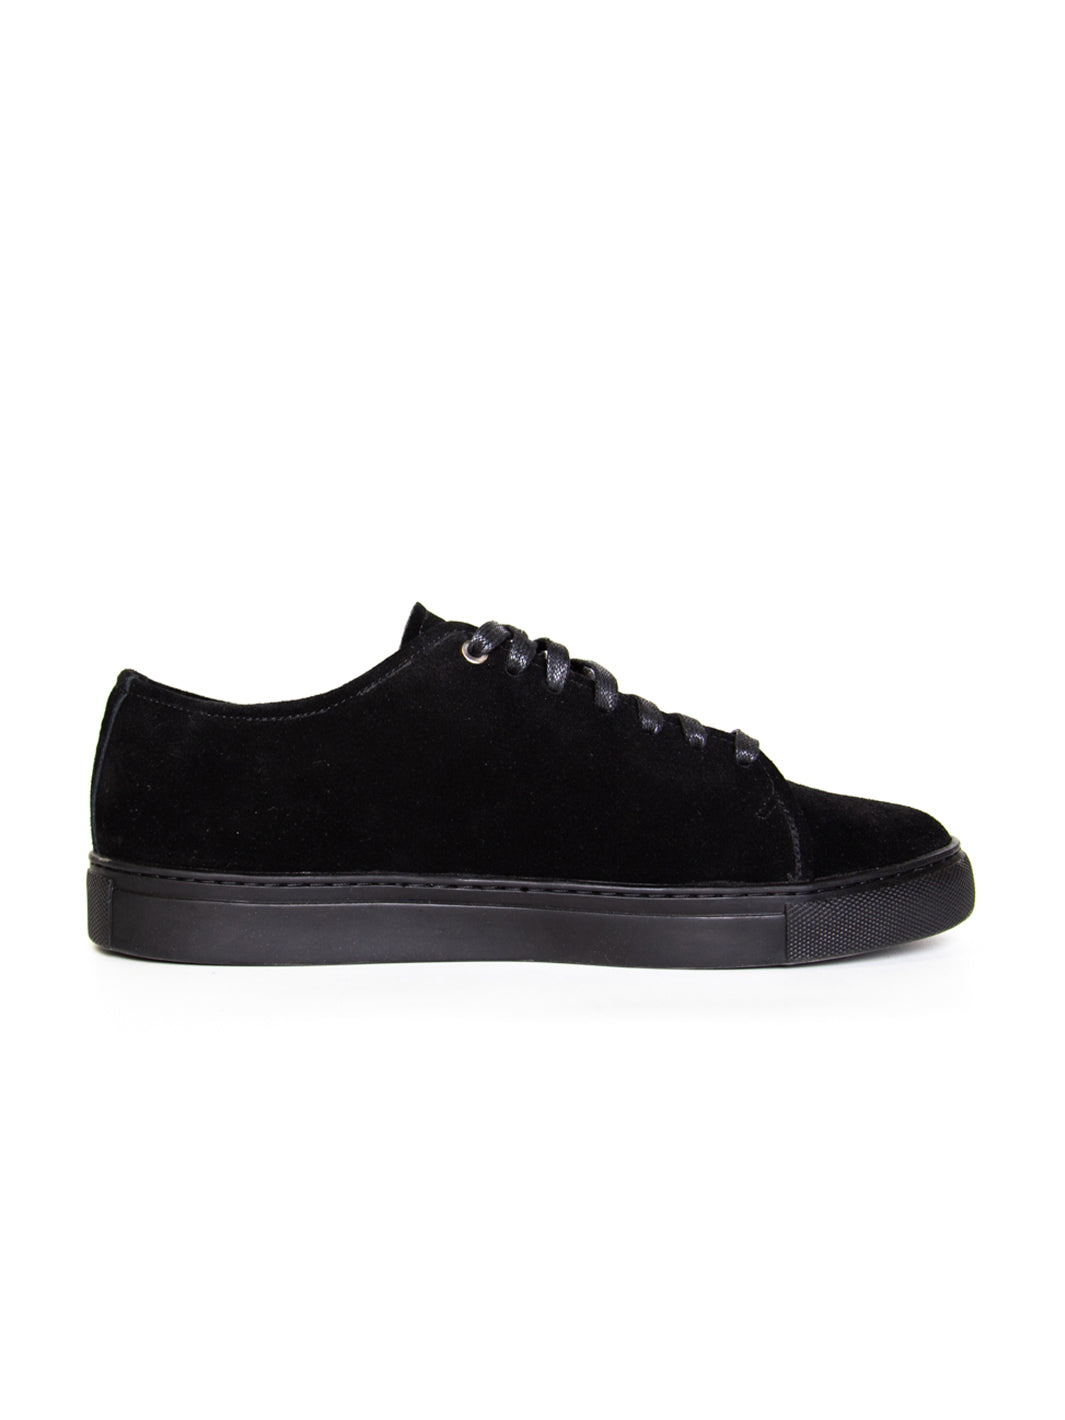 Side view of Asuwere suede leather sneakers in navy